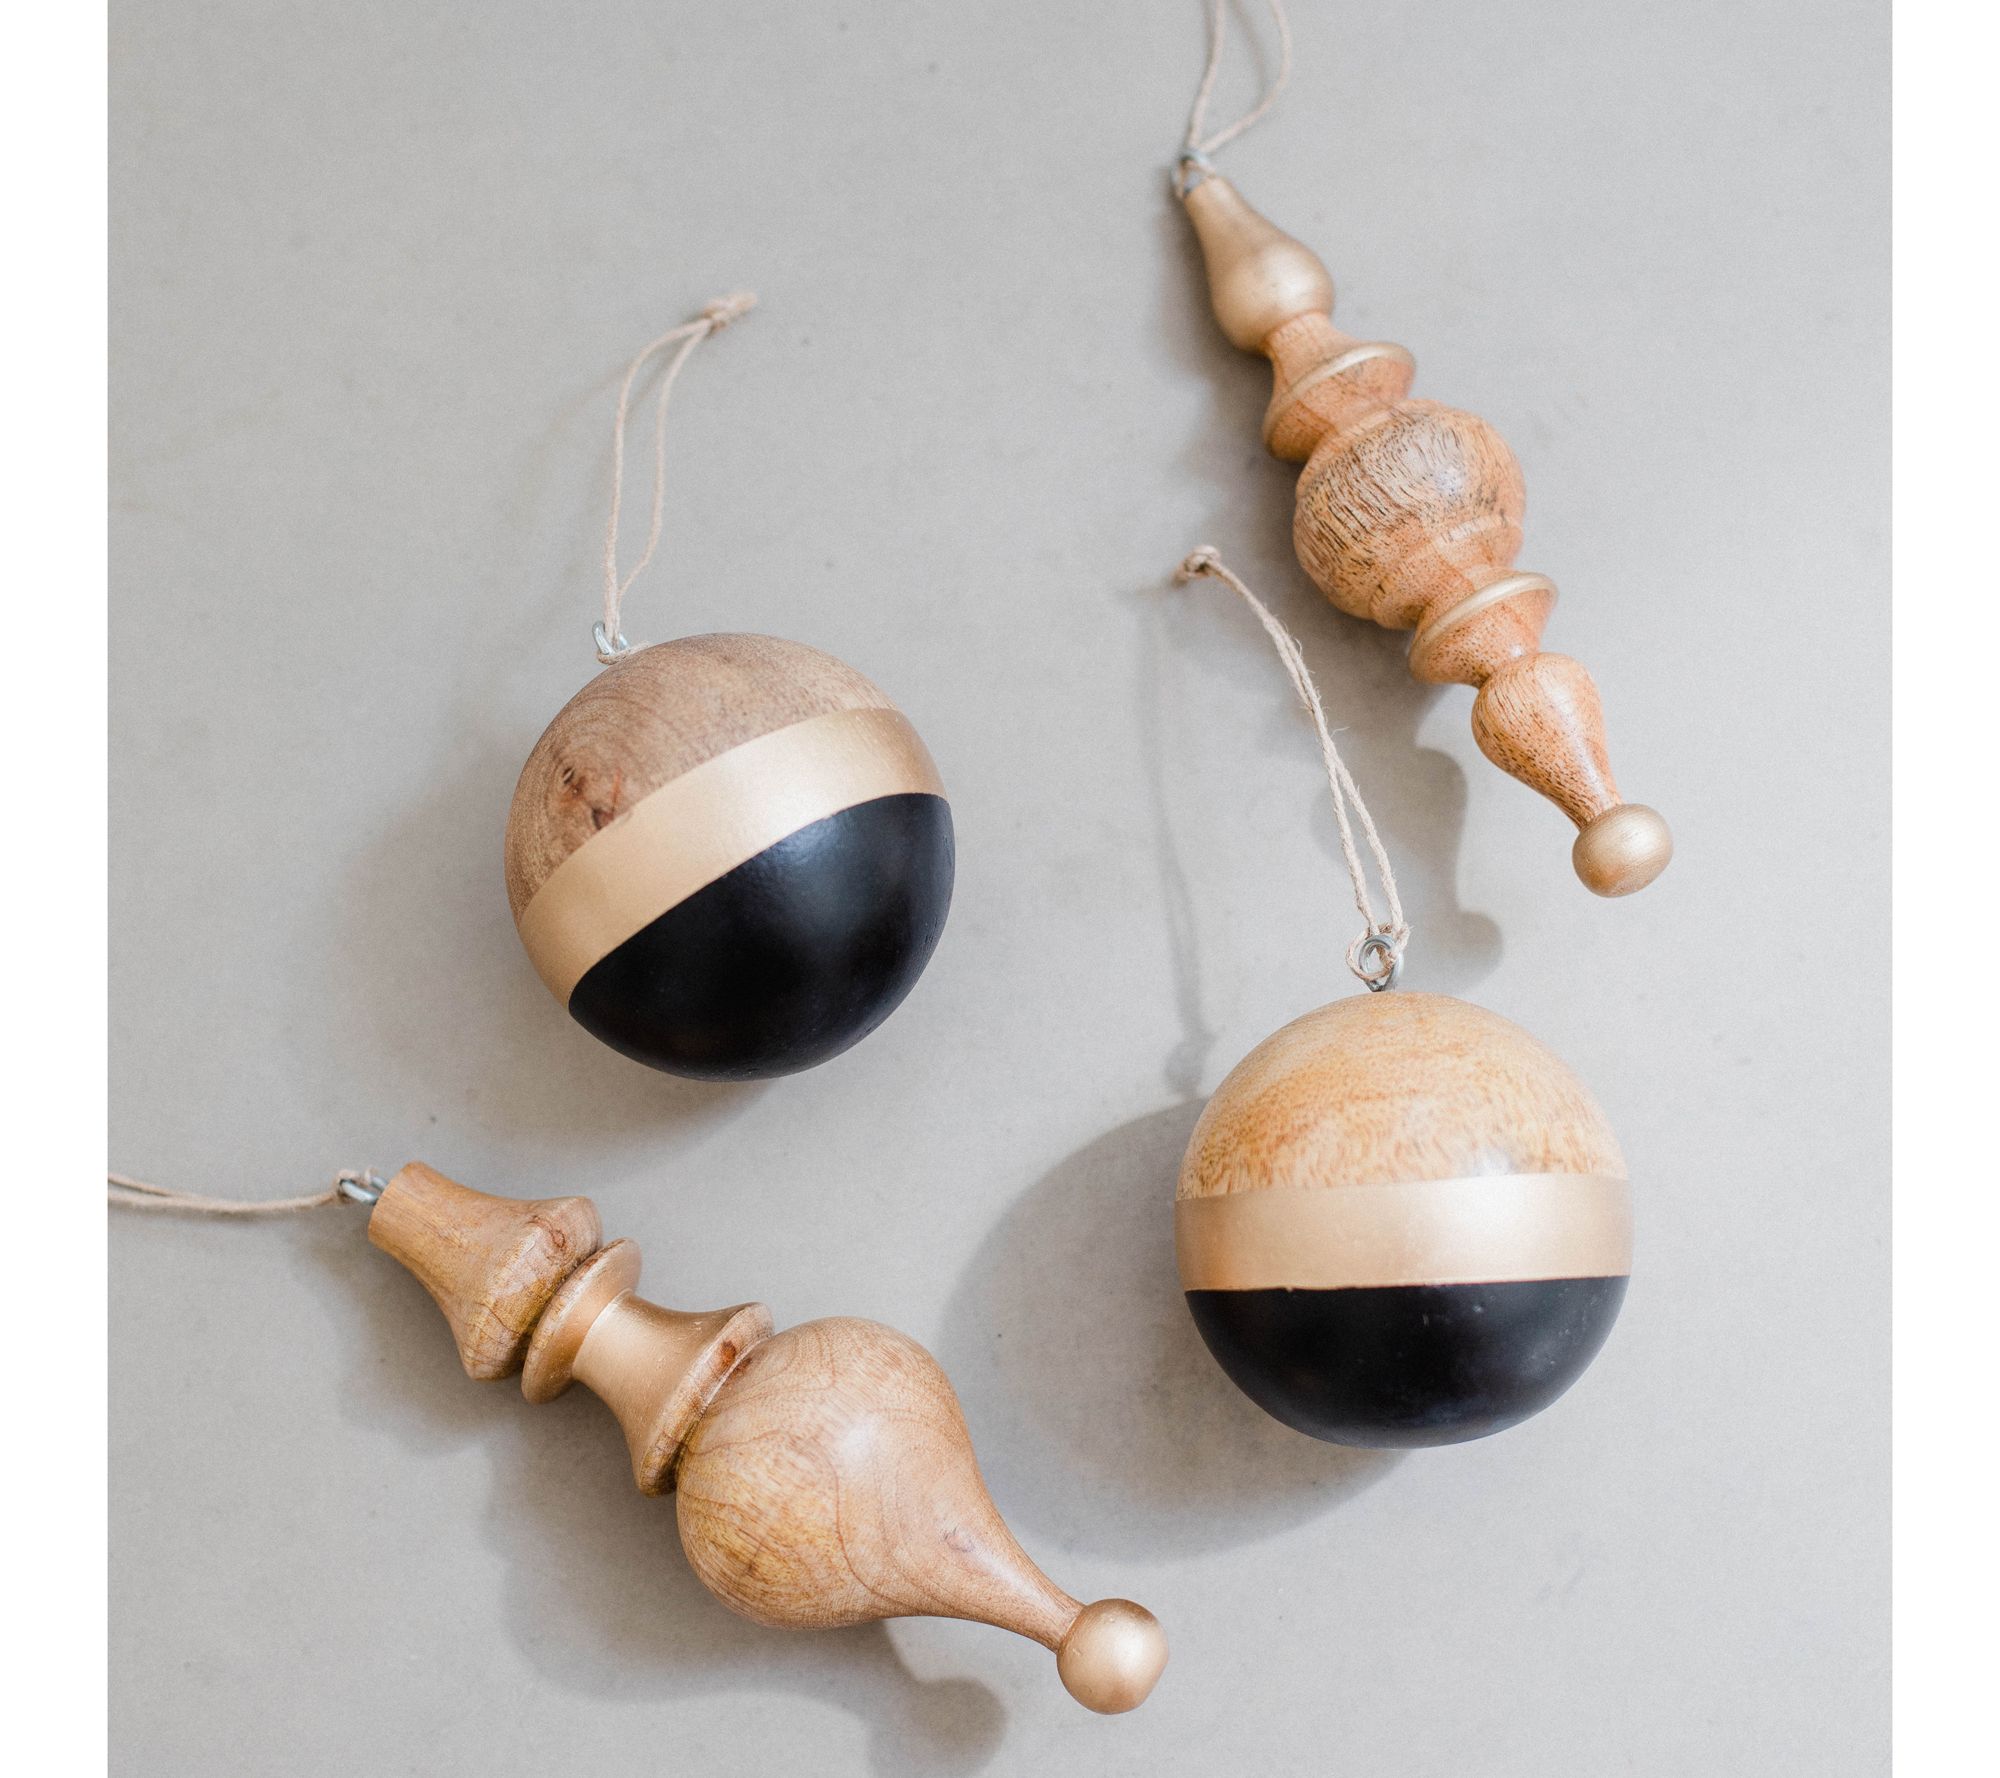 Set of 4 Painted Wooden Ball and Finial Ornaments by Lauren McBride